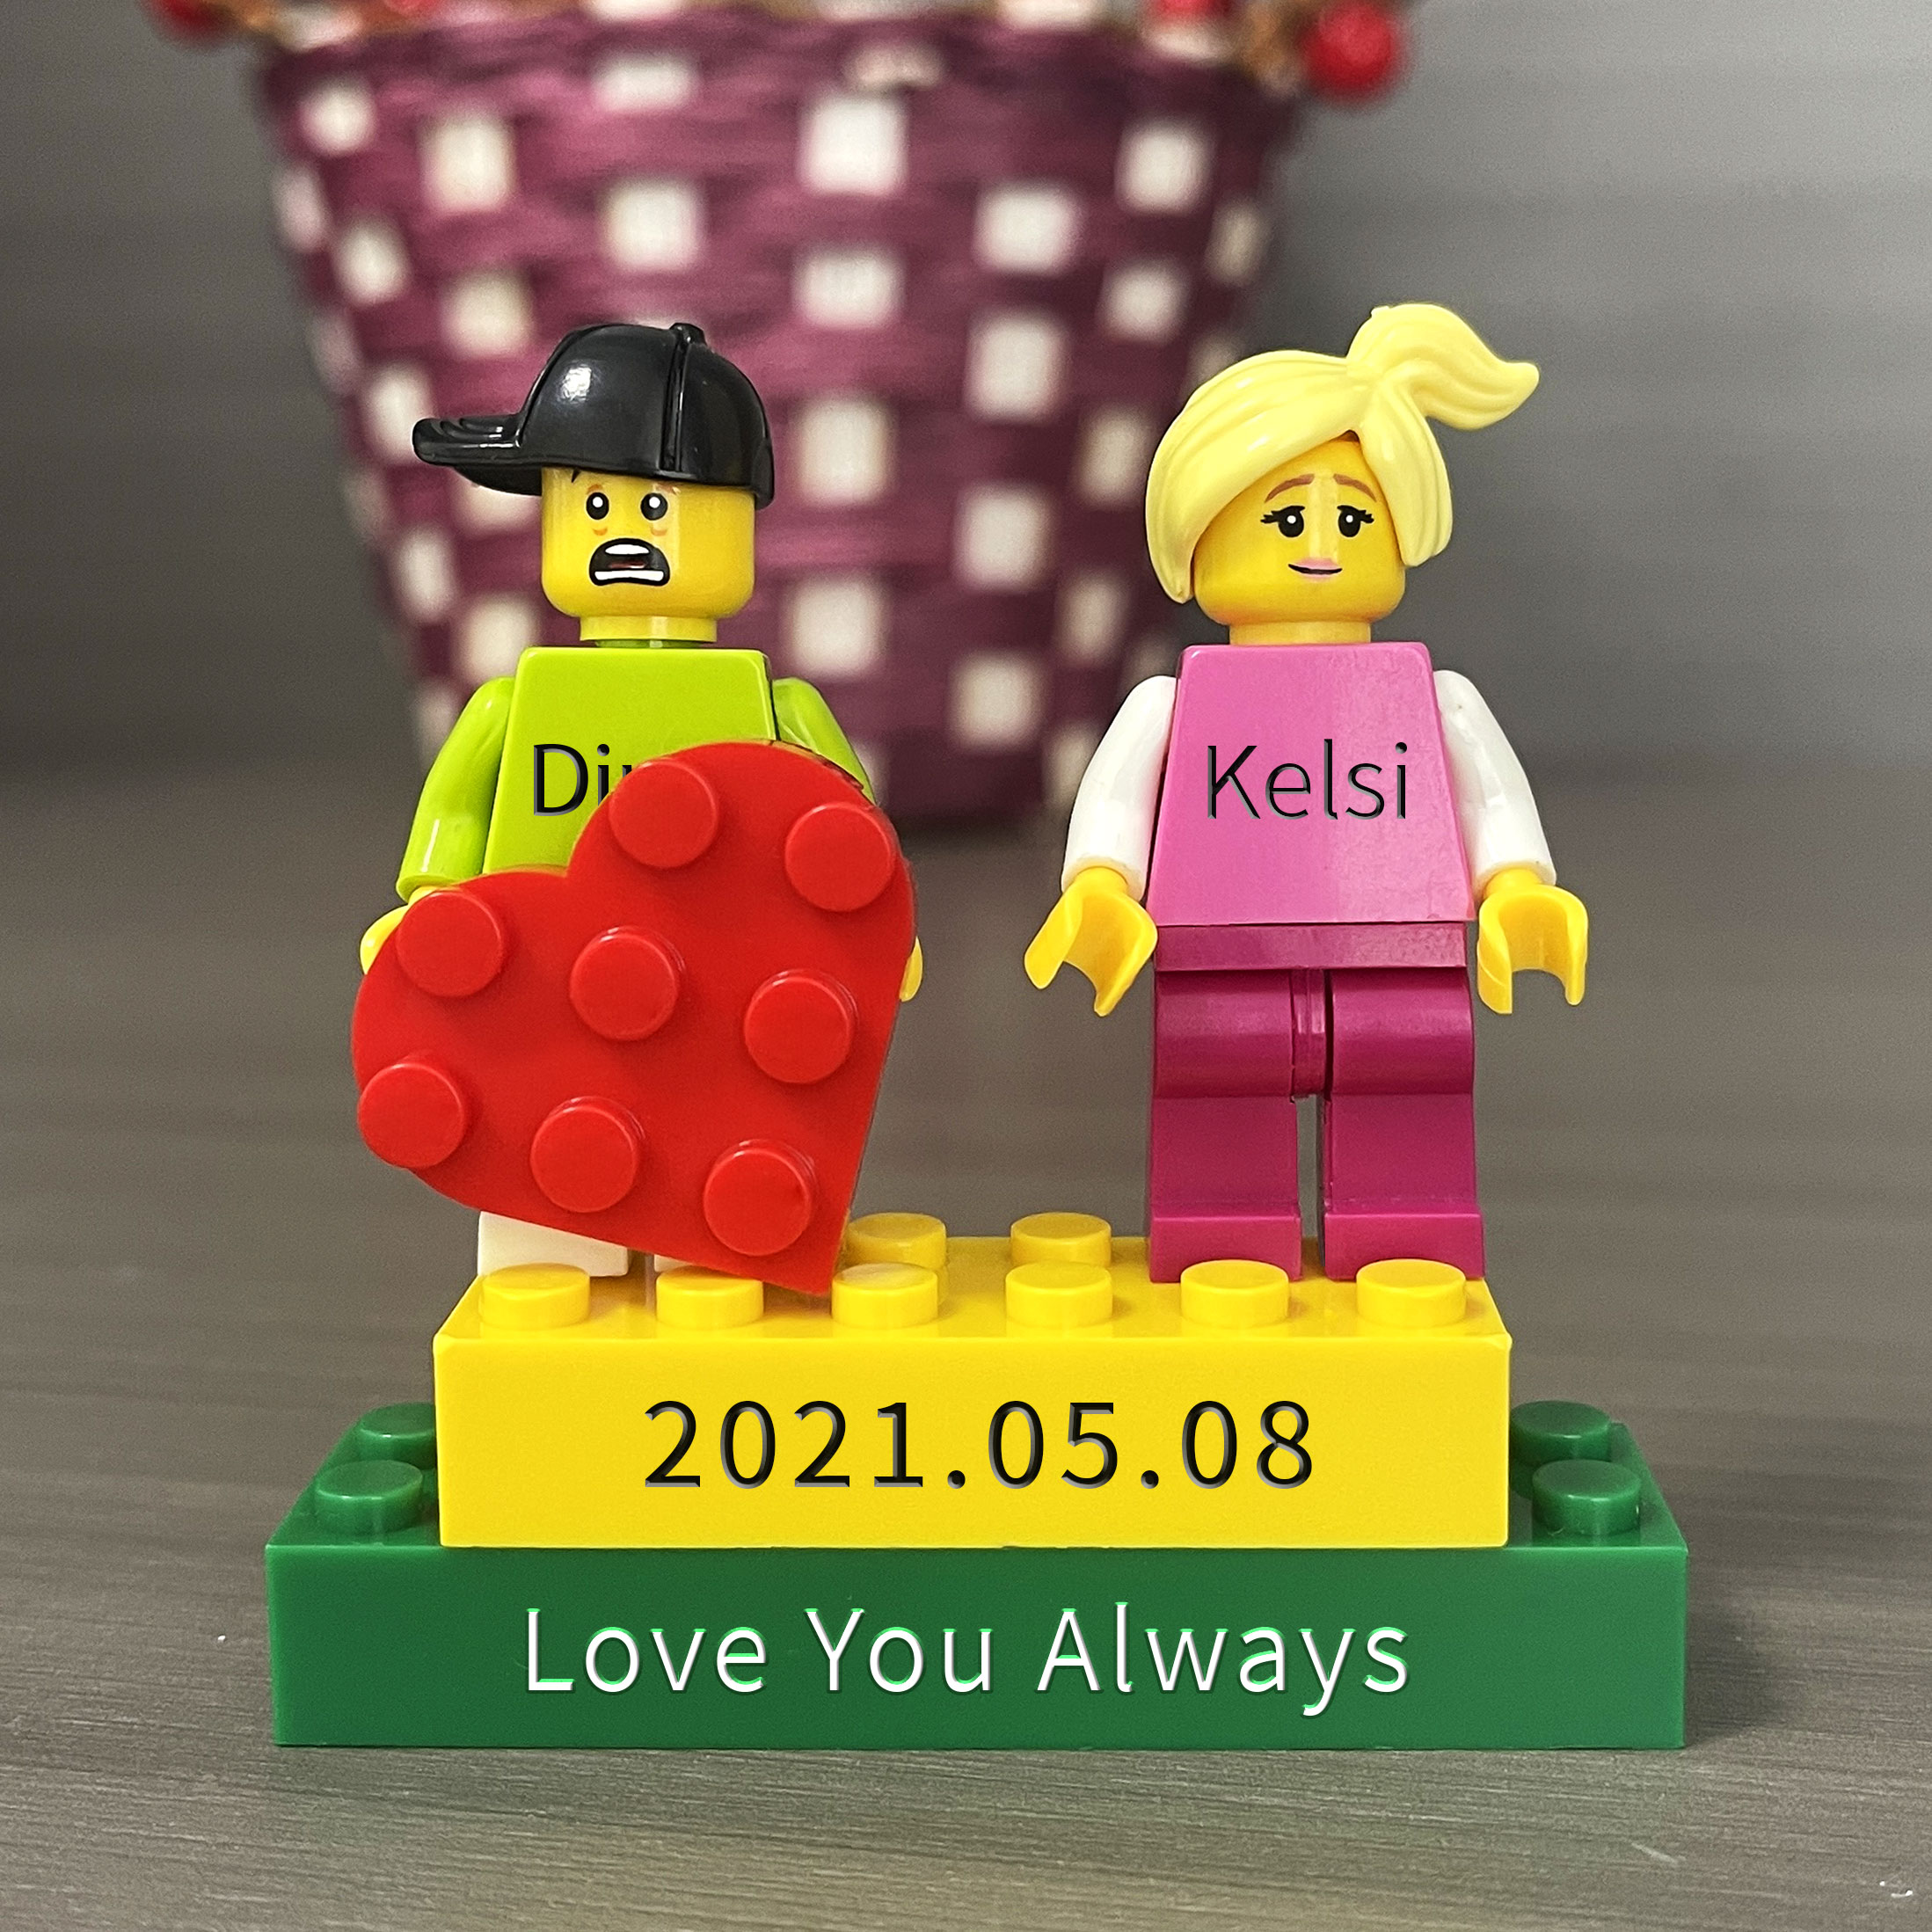 Love You Always Personalized Figures on Personalized Brick With Love/Pets For Happy Valentine's Day Merry Christmas